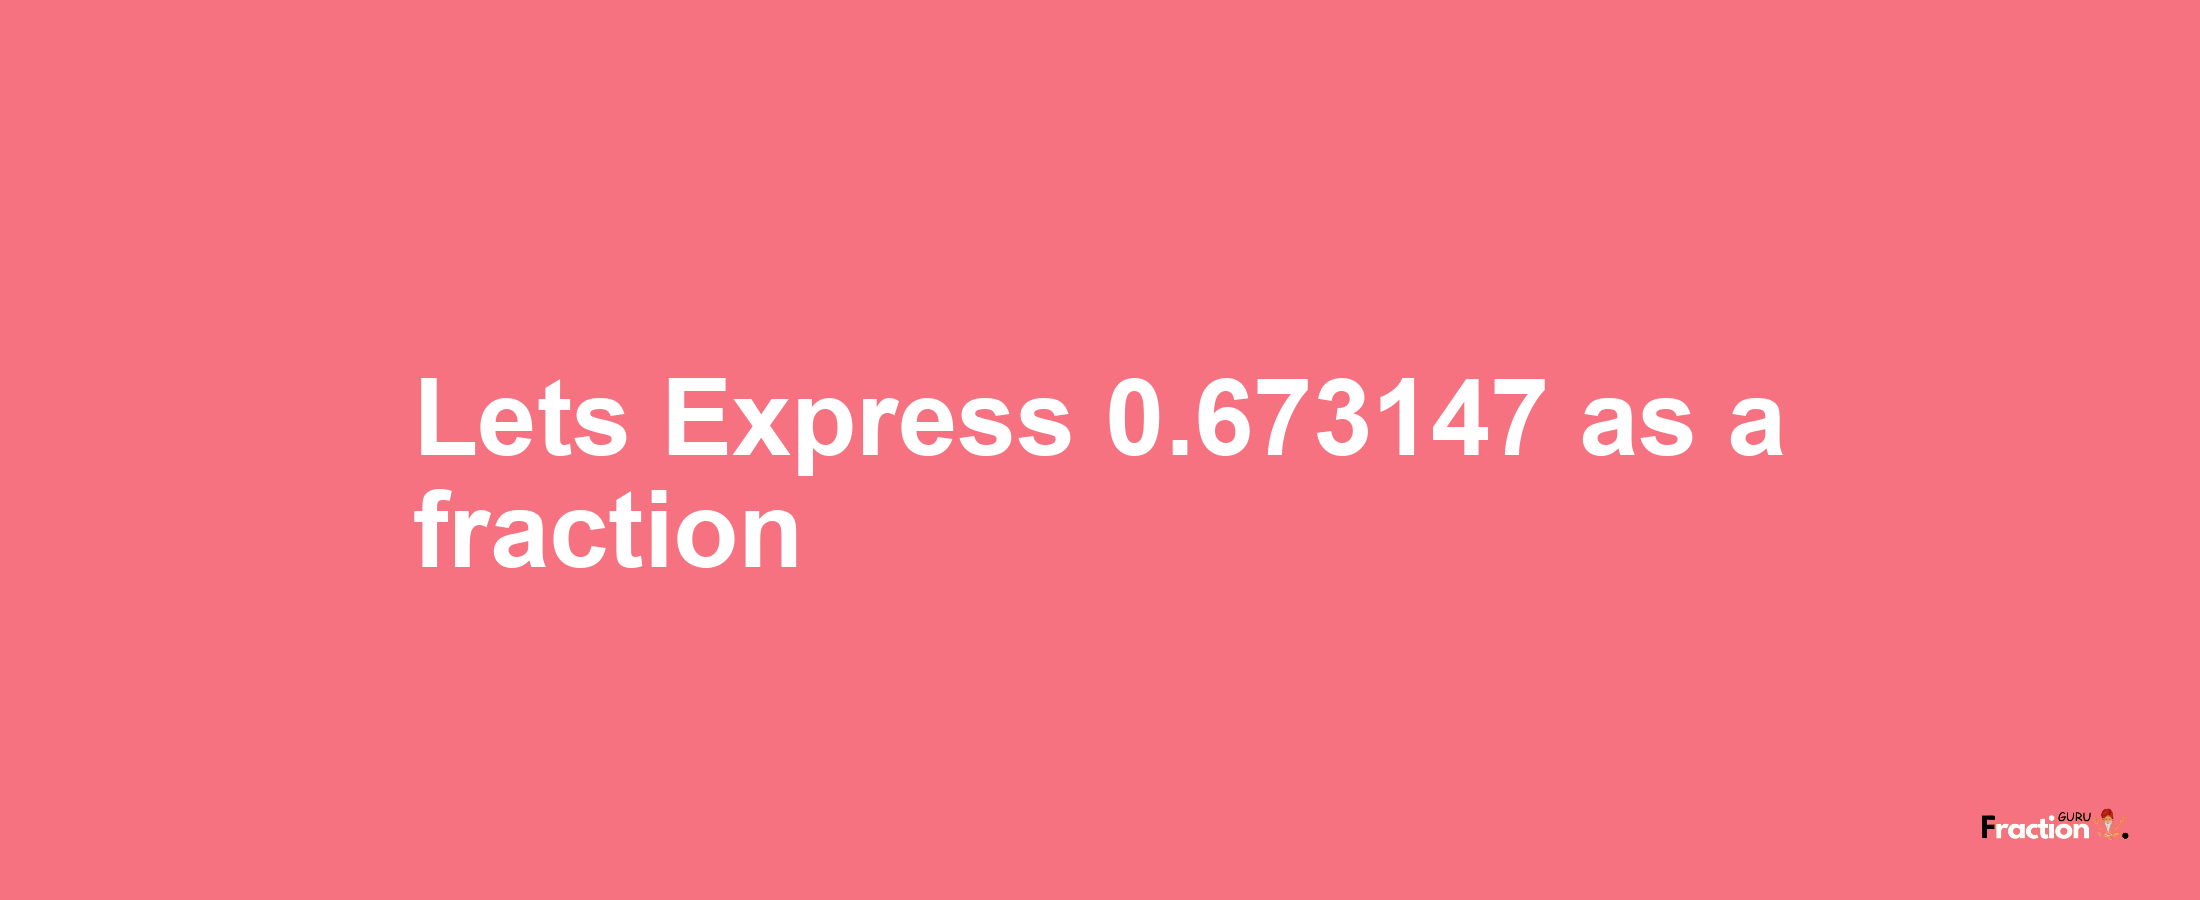 Lets Express 0.673147 as afraction